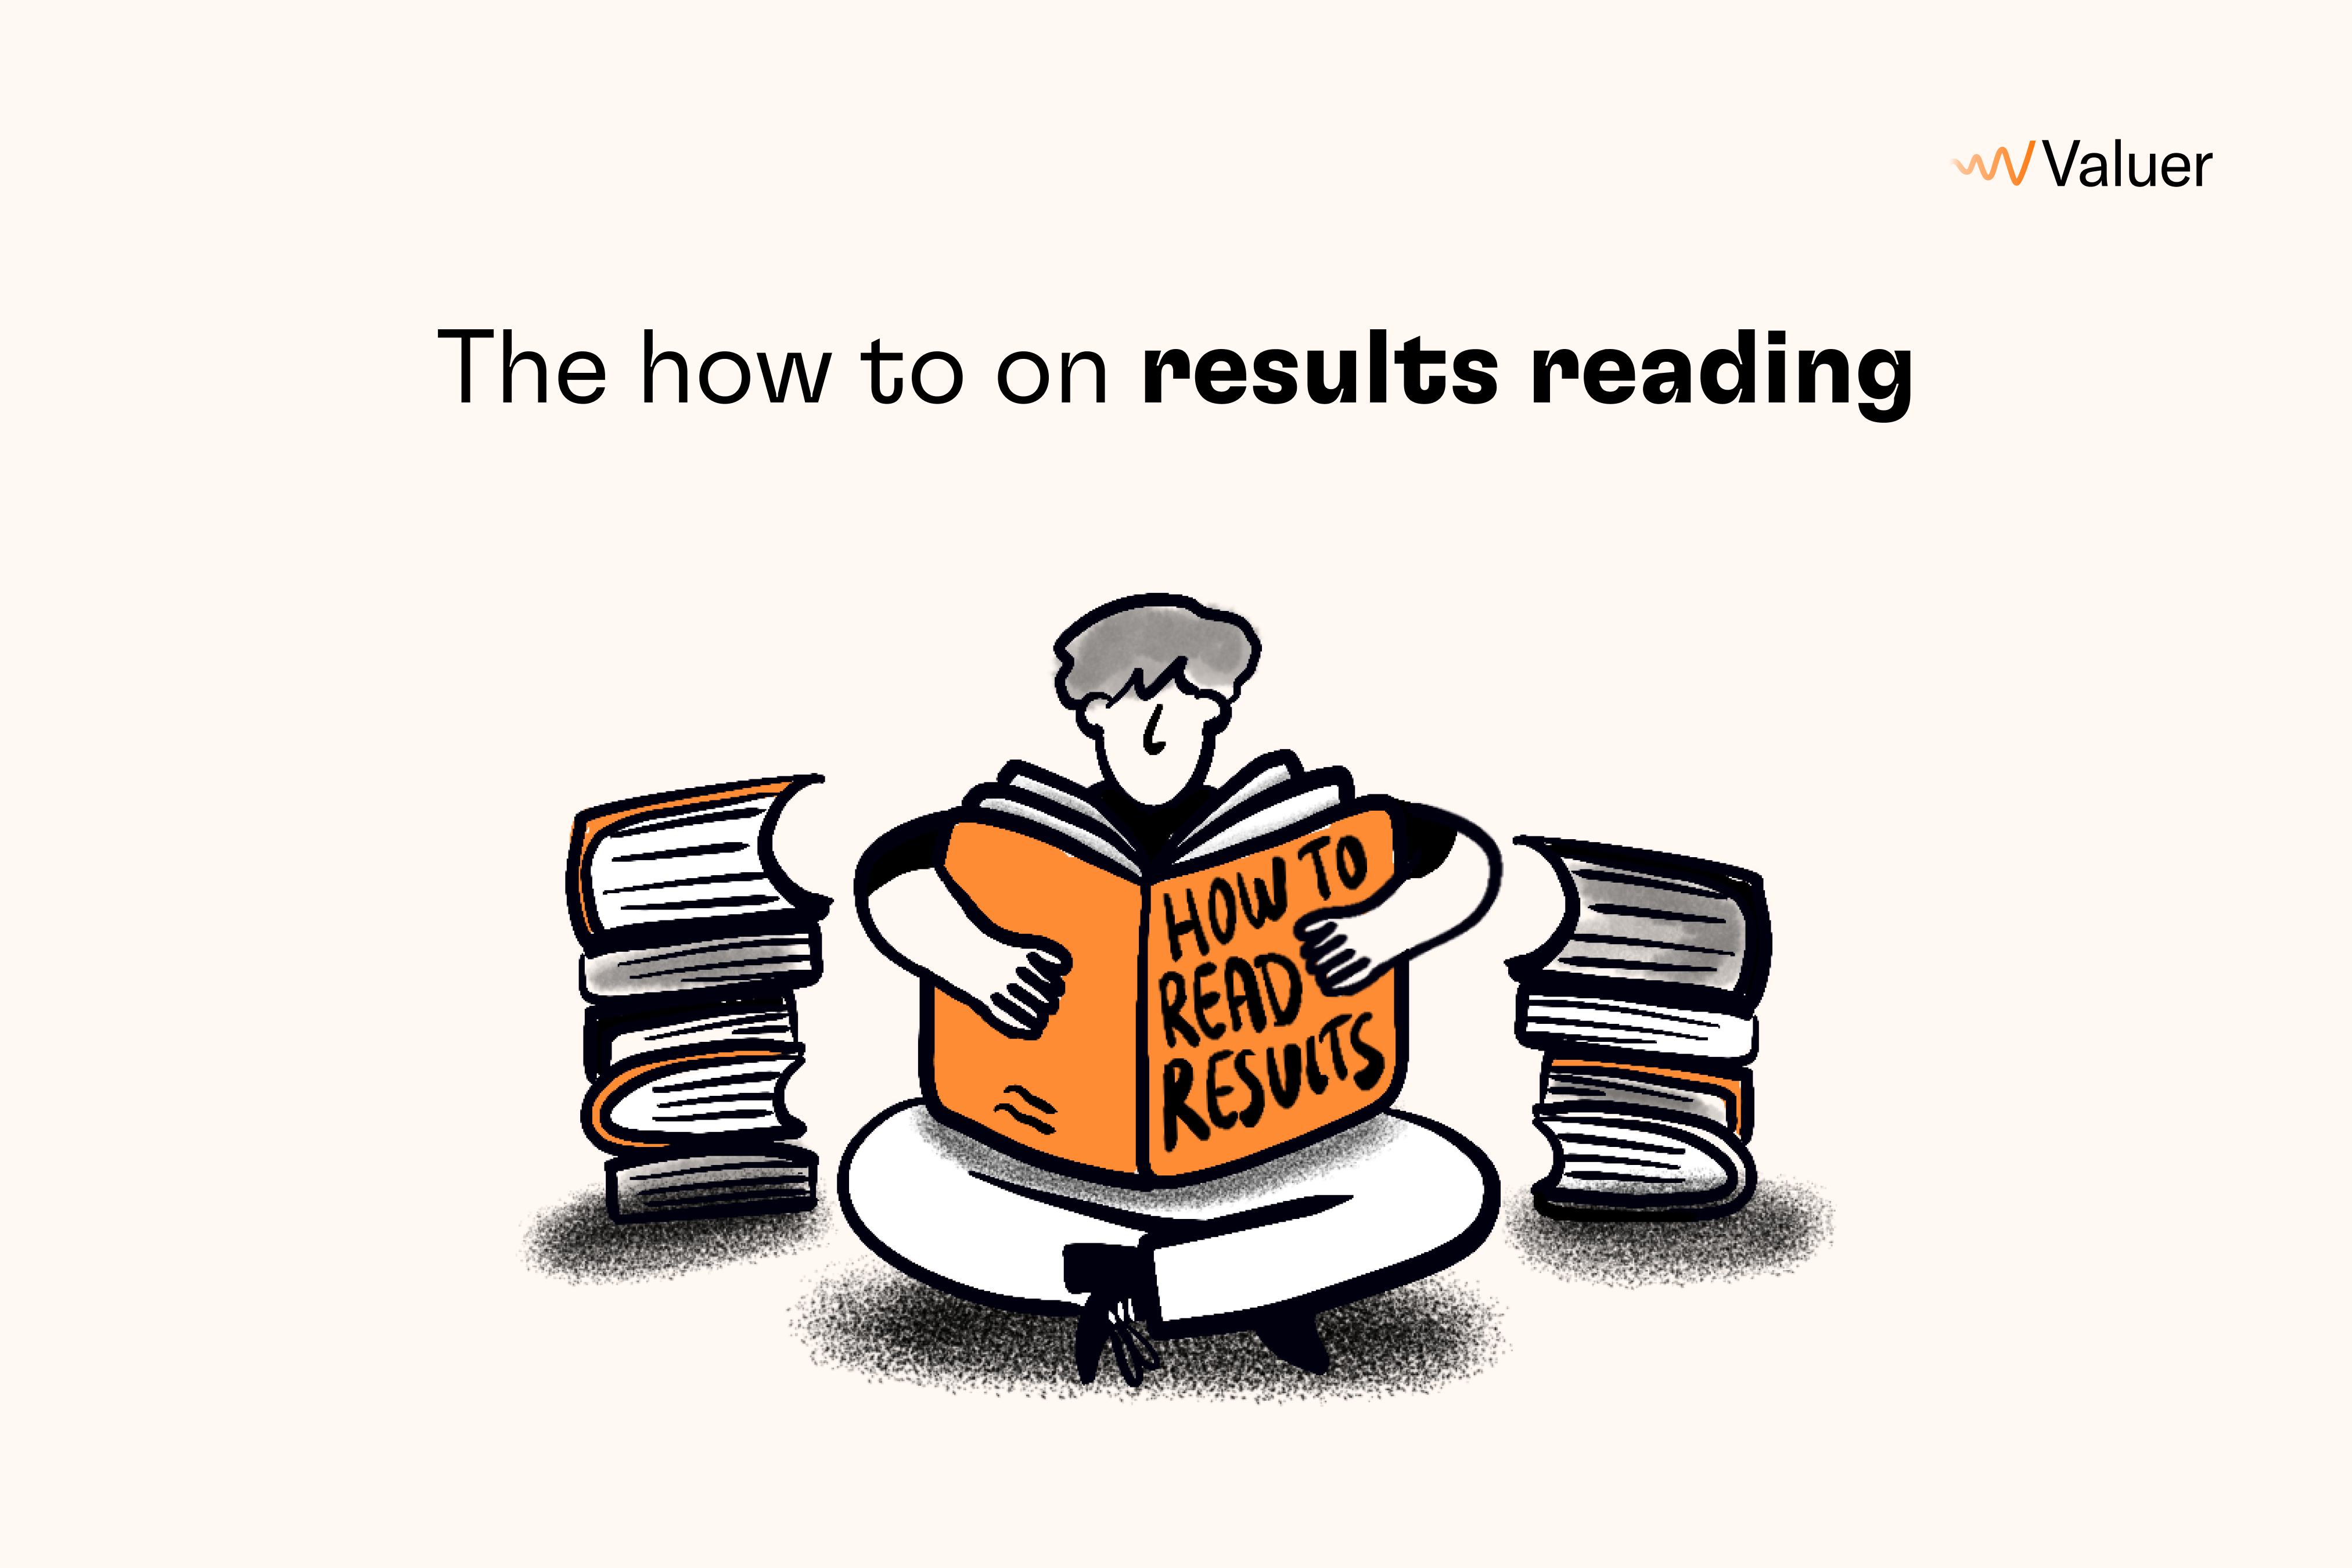 The how to on results reading